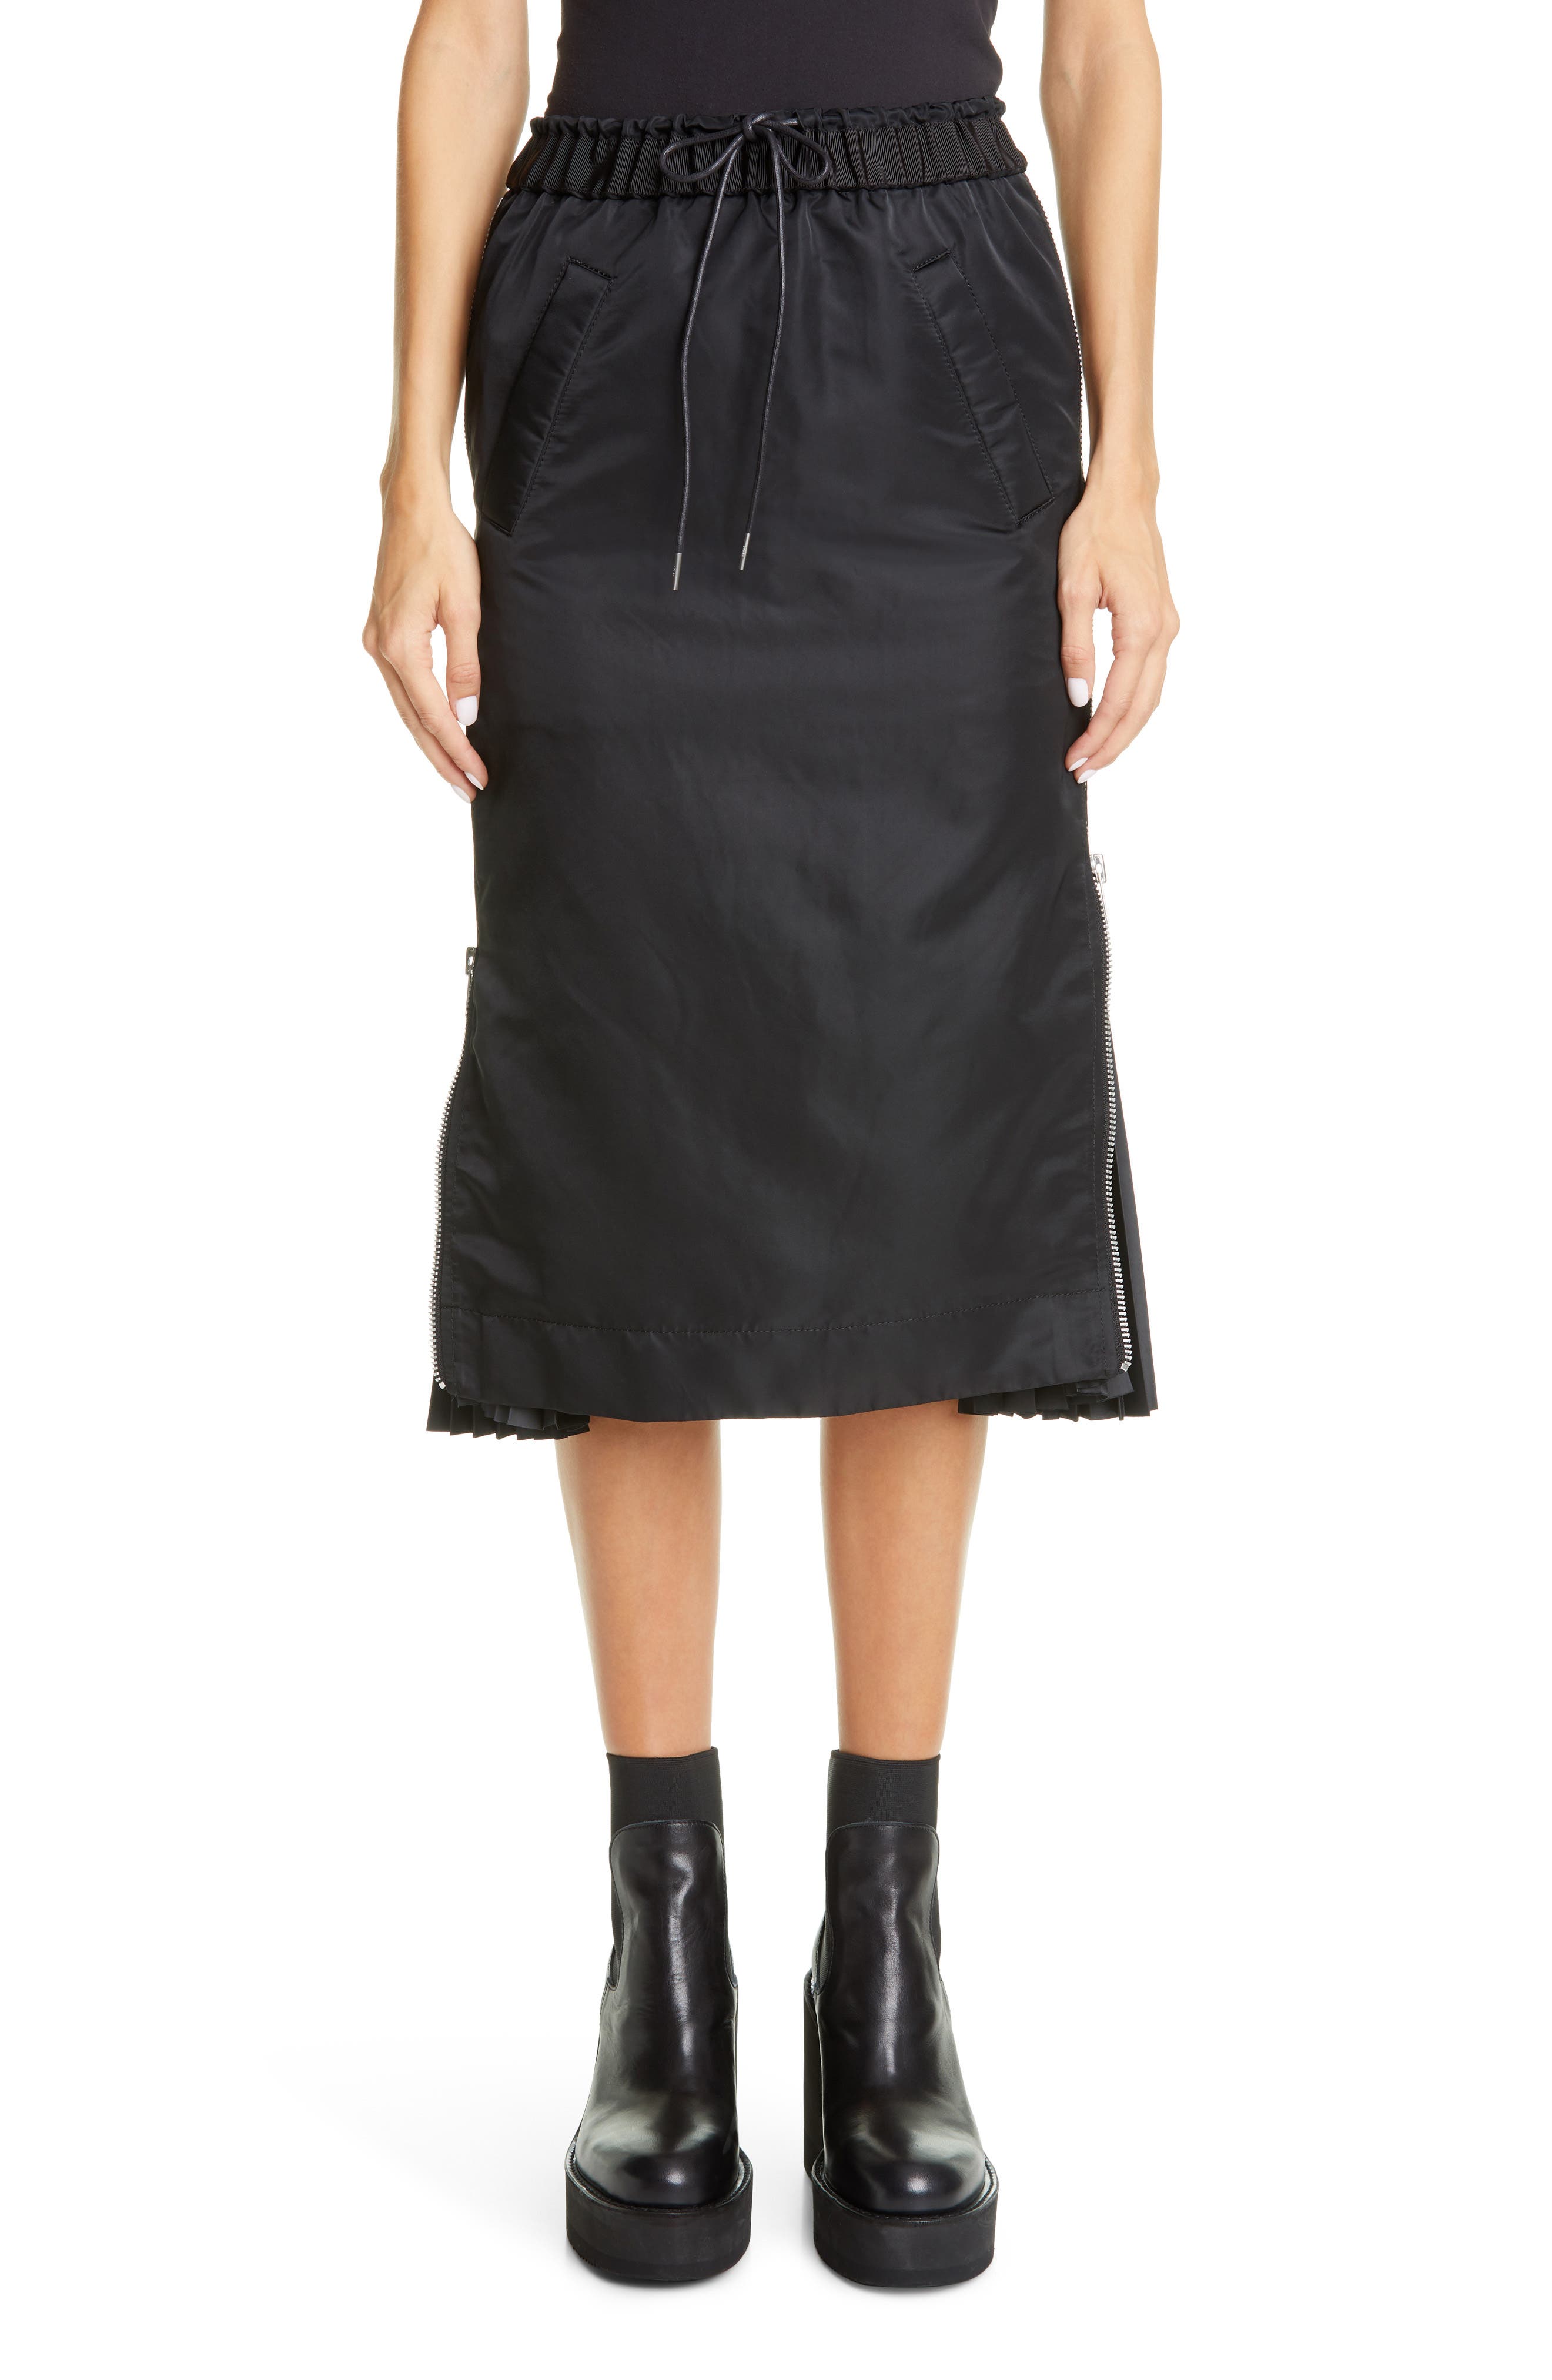 Sacai MA-1 Side Gusset Skirt in Black at Nordstrom, Size 4